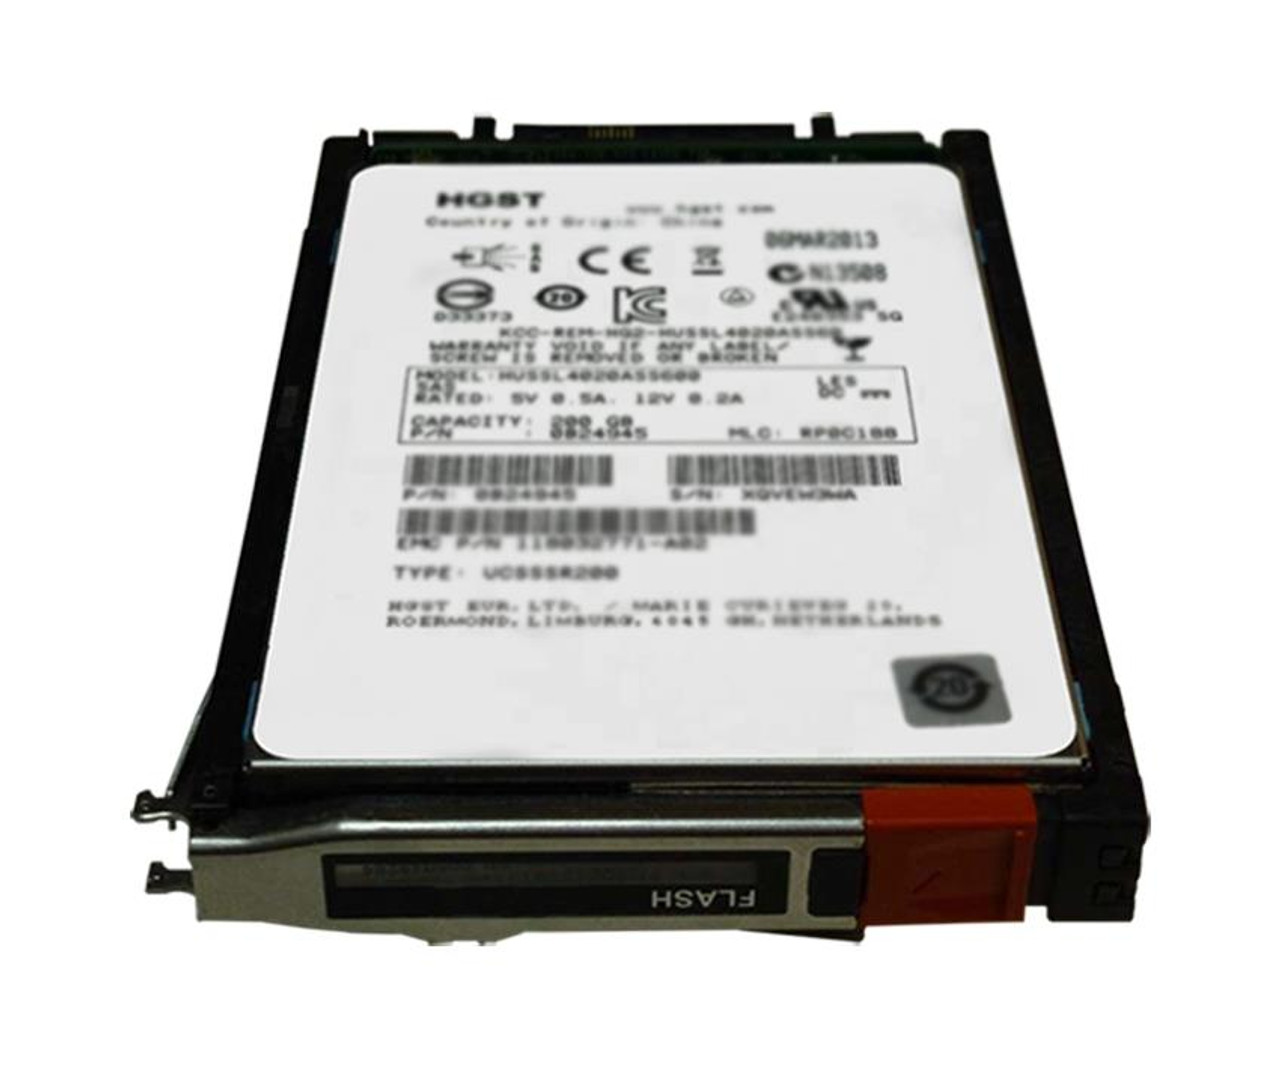 D3N-2S12FXL-3200 EMC 3.2TB SAS 12Gbps 2.5-inch Internal Solid State Drive (SSD) for Unity AFP 25 x 2.5 Enclosure